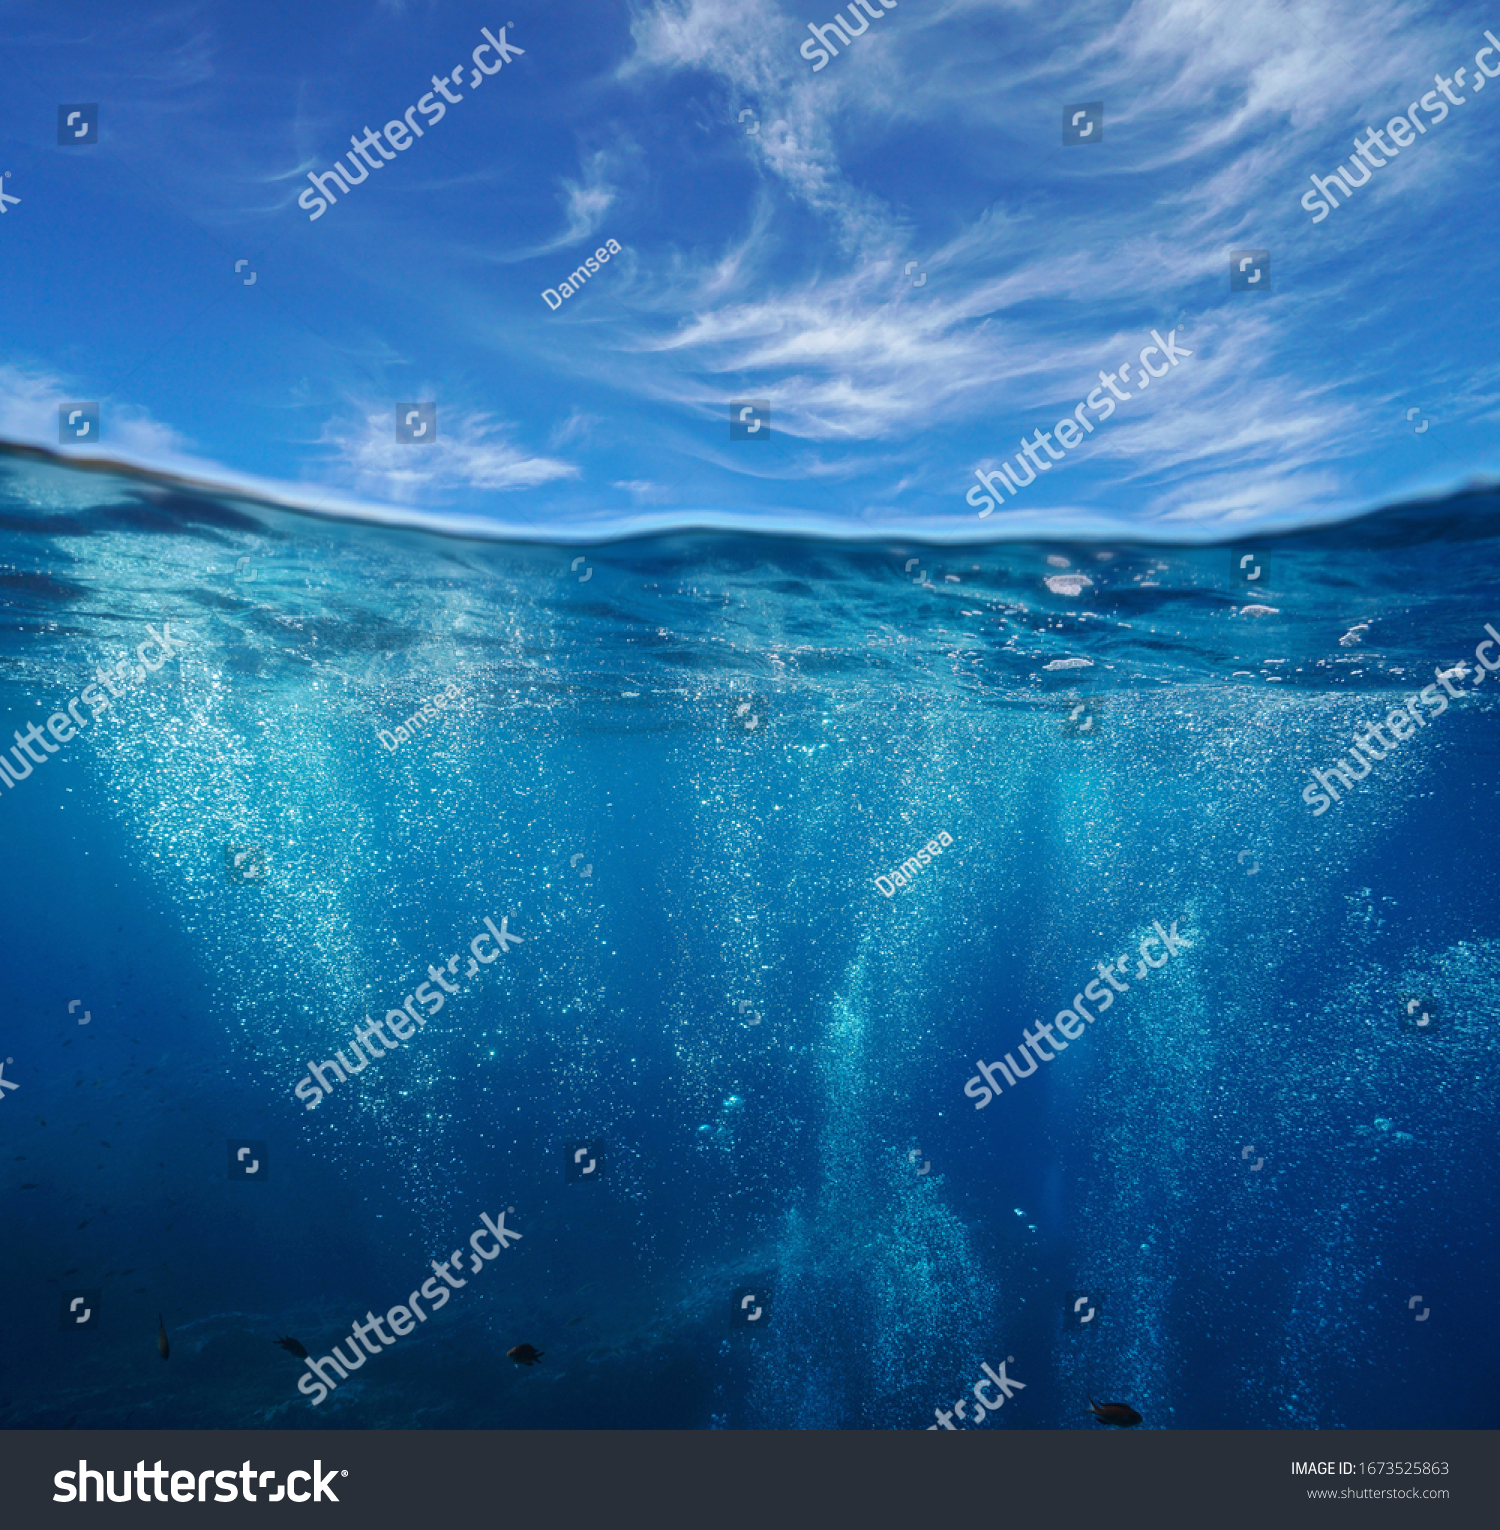 Seascape, air bubbles underwater sea and blue sky with cloud, split view over and under water surface, Mediterranean, France #1673525863